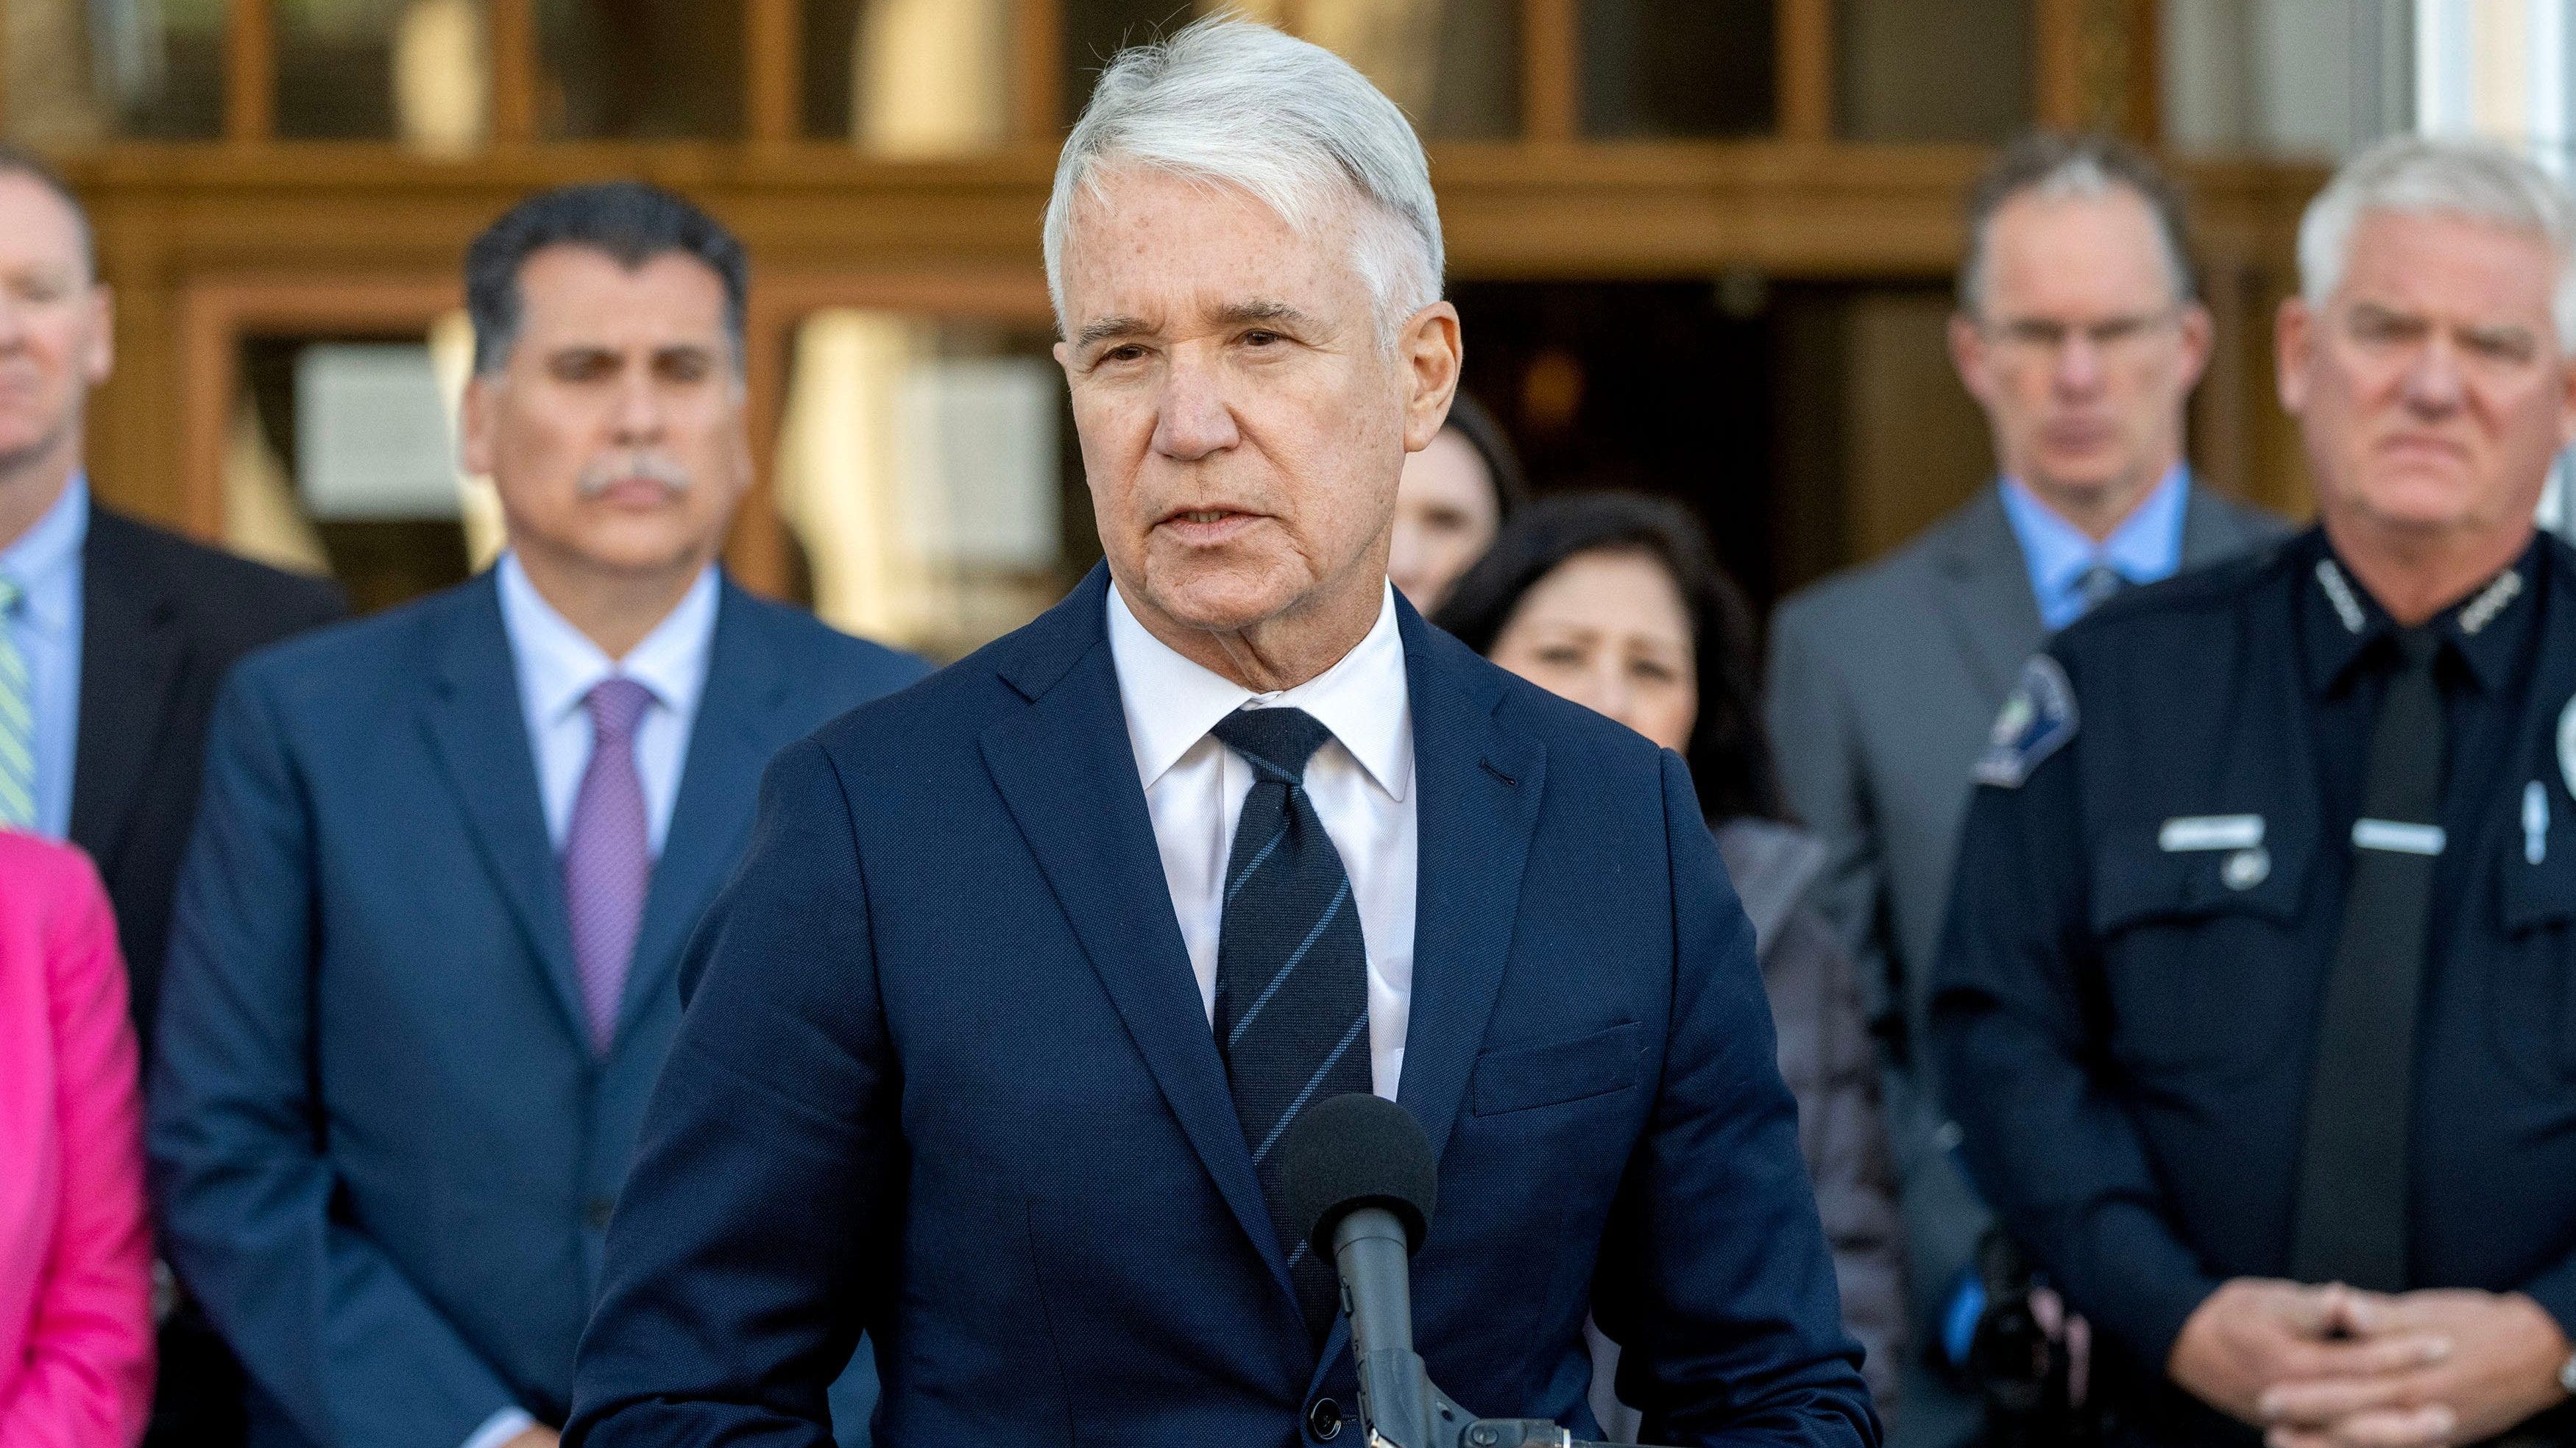 Los Angeles DA George Gascon's office leaves Twitter, cites 'unchecked vitriol'